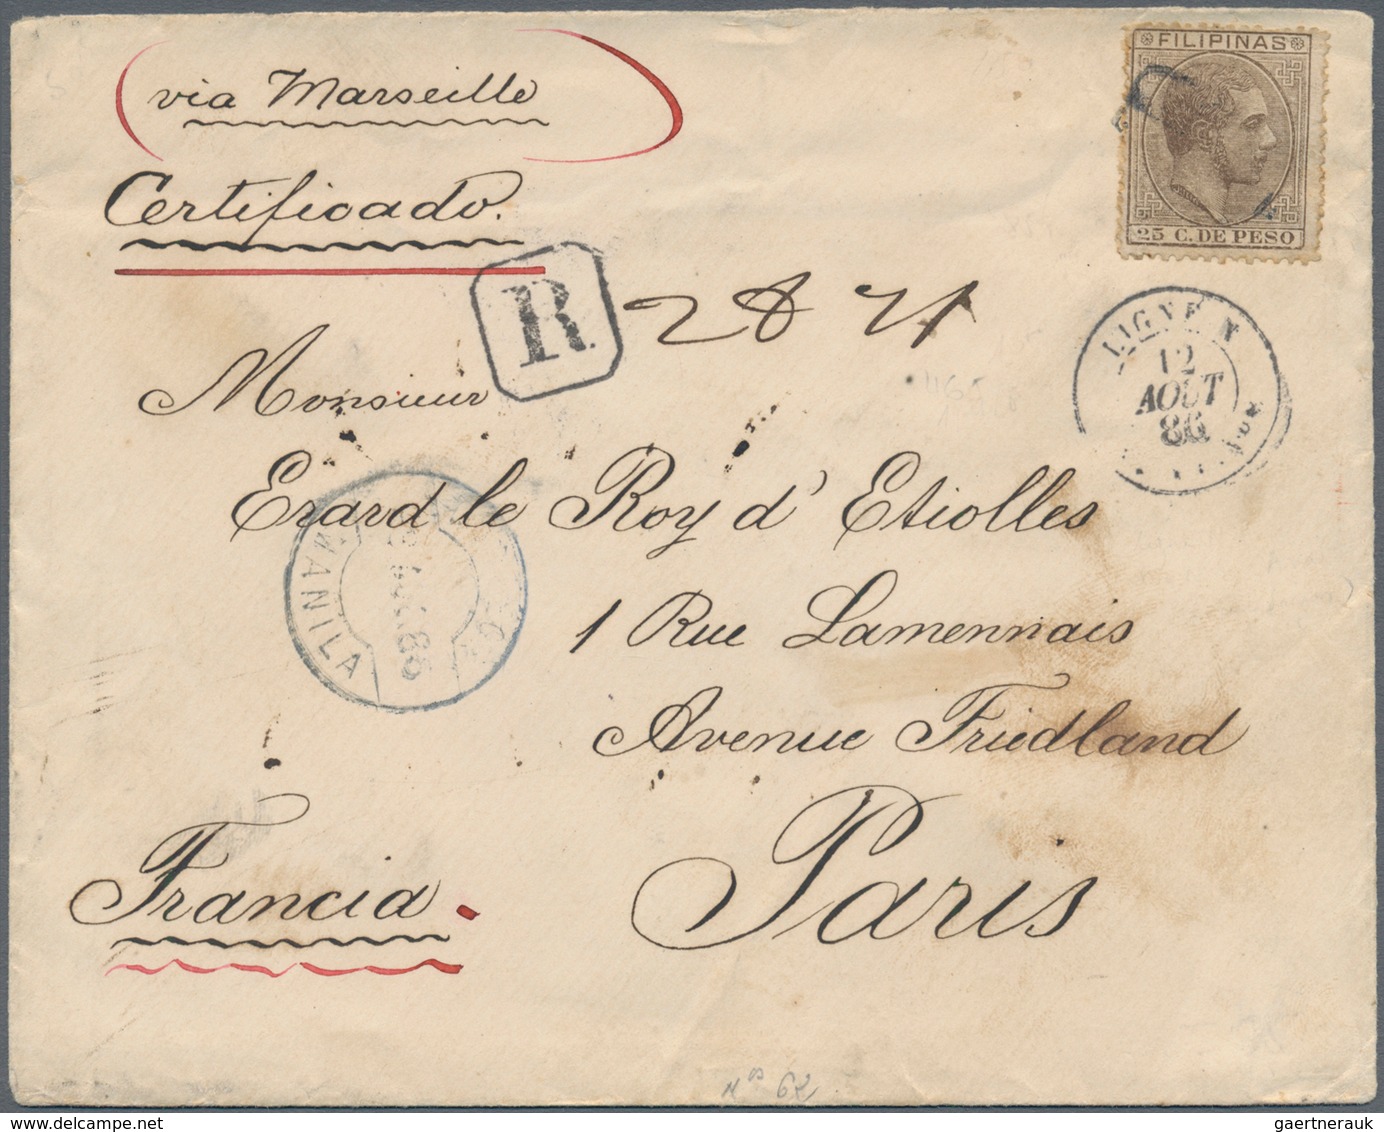 Philippinen: 1880/83, 25 Cts. Brown Tied "R" To Cover From Manila To Paris W. Blue "MANILA 8 AUG 86" - Philippinen